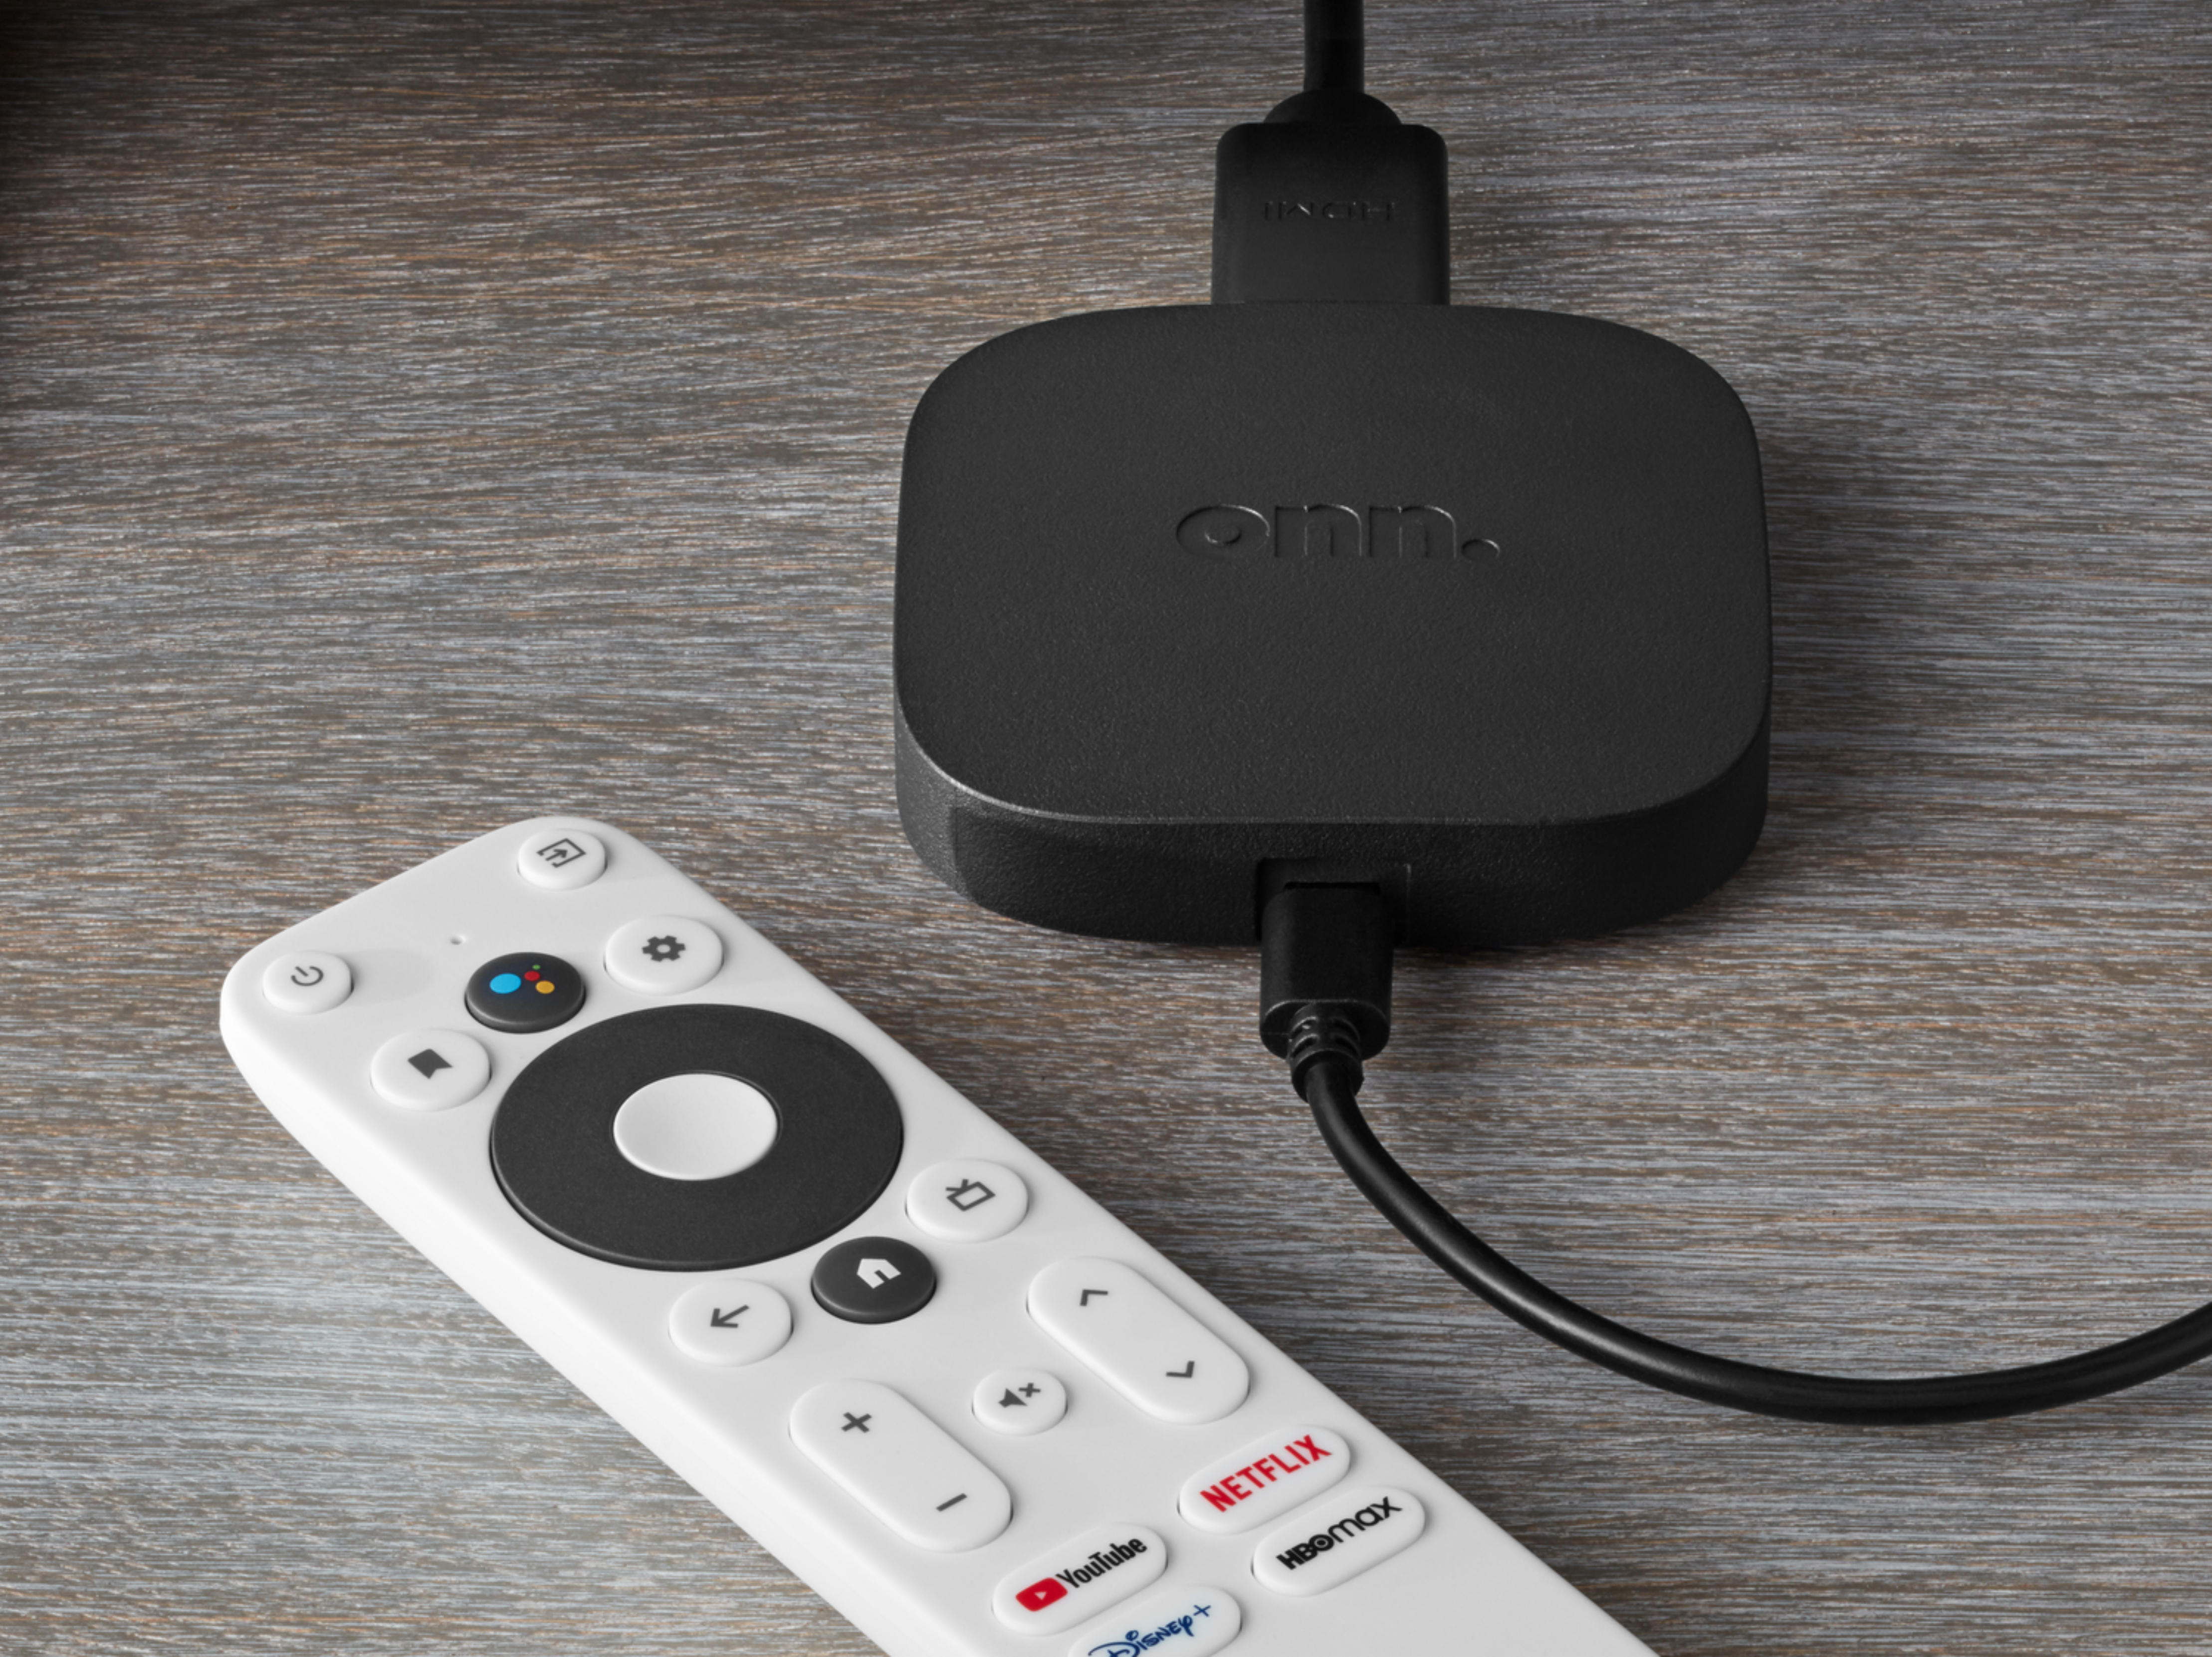 Say hello to Walmart’s ultra-affordable Onn. 4K Android TV Box